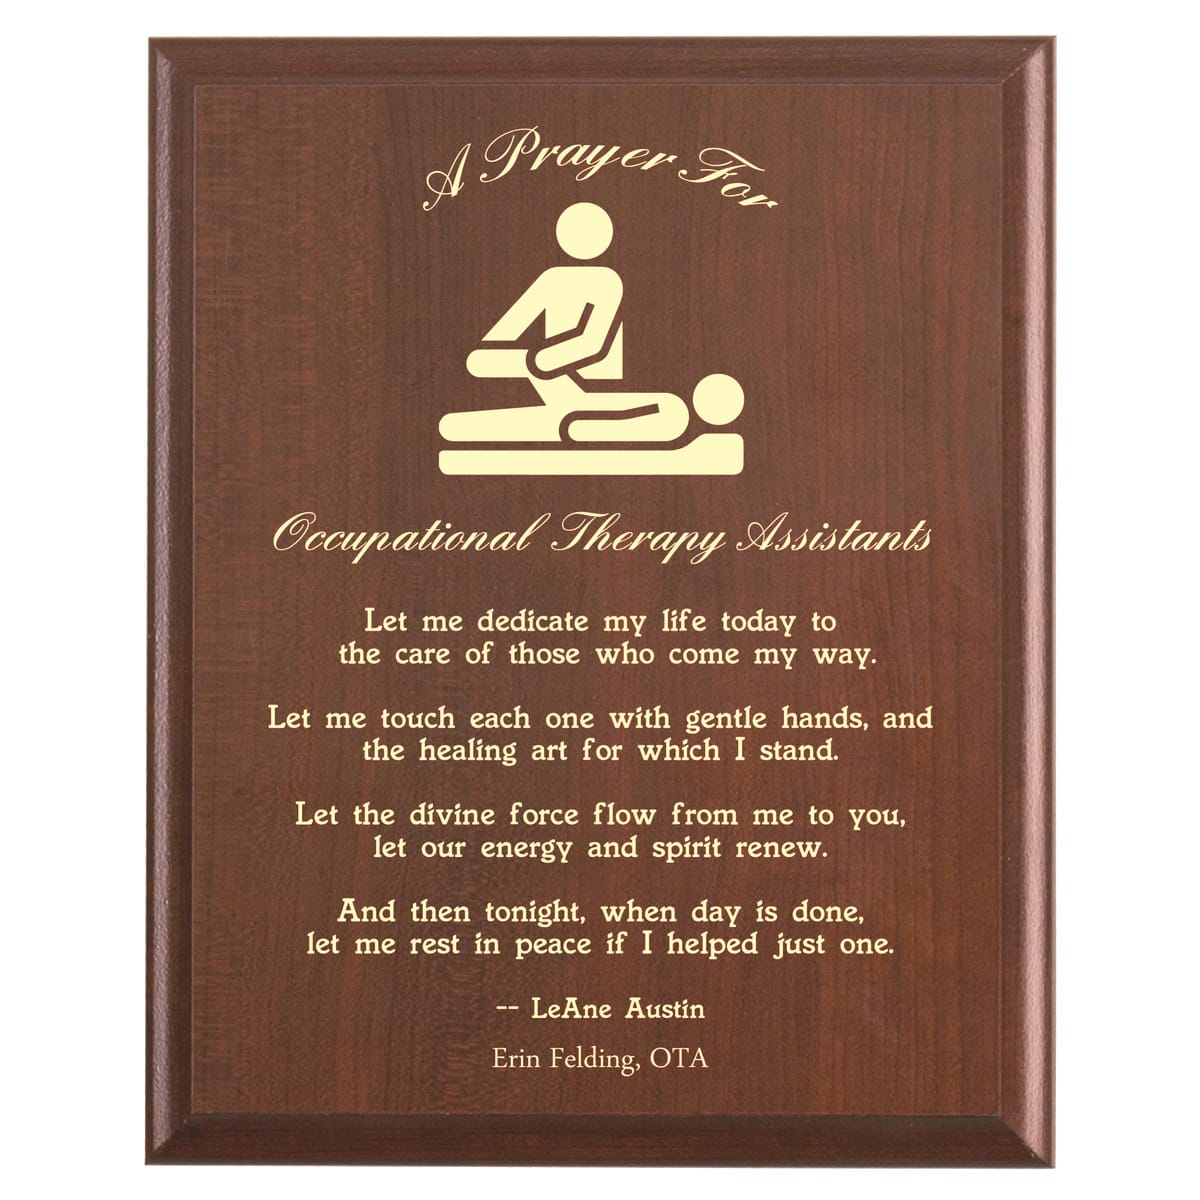 Plaque photo: Occupational Therapist Assistant Prayer Plaque design with free personalization. Wood style finish with customized text.